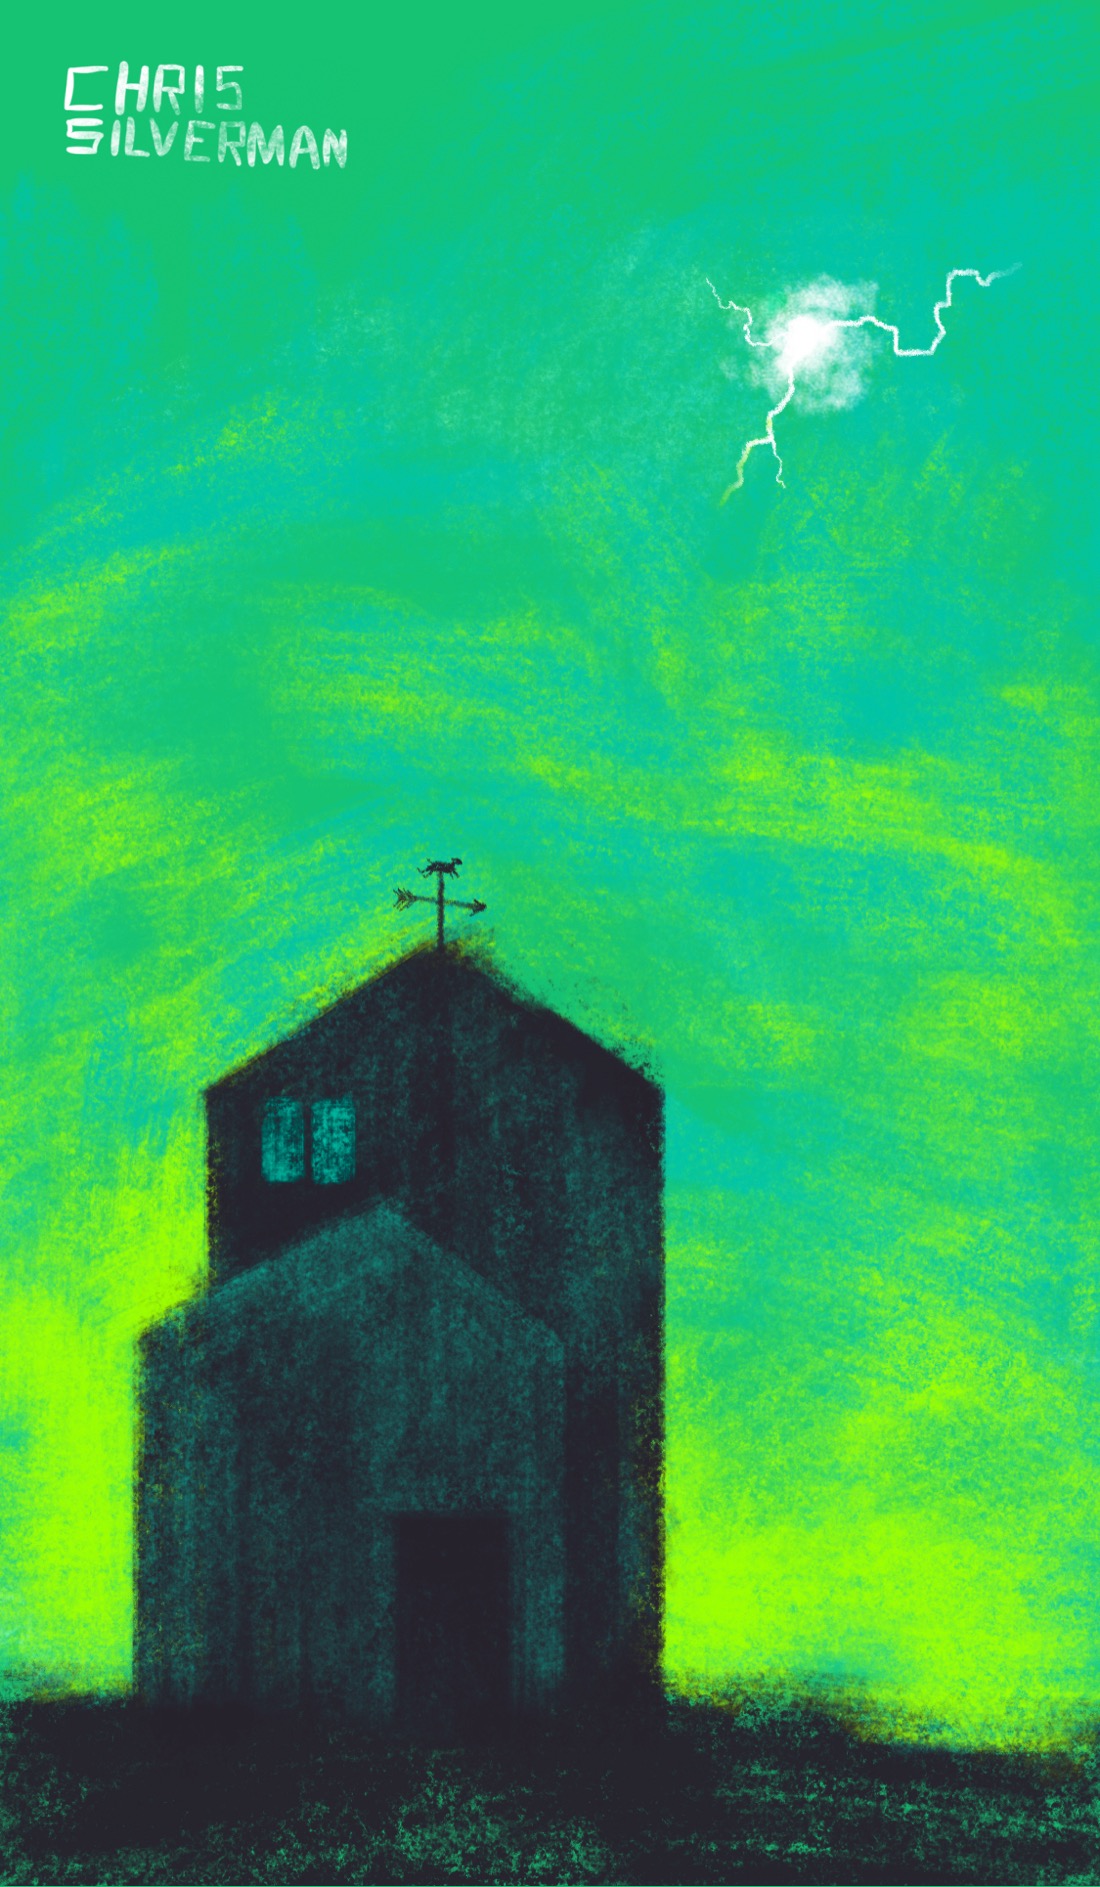 A vast, eerily green sky. The dark silhouette of a house sits alone on a flat landscape. Facing the viewer is an open door, like one would find on a barn or garage. The house has two small windows in the top left of it: dull green, more like they're reflecting the light of the sky than illuminated from within. Above the house, as though something has punched a small hole in the sky, is a bright dot of white light surrounded by glowing clouds. Tendrils of lightning snake out of the dot. Something is brewing.